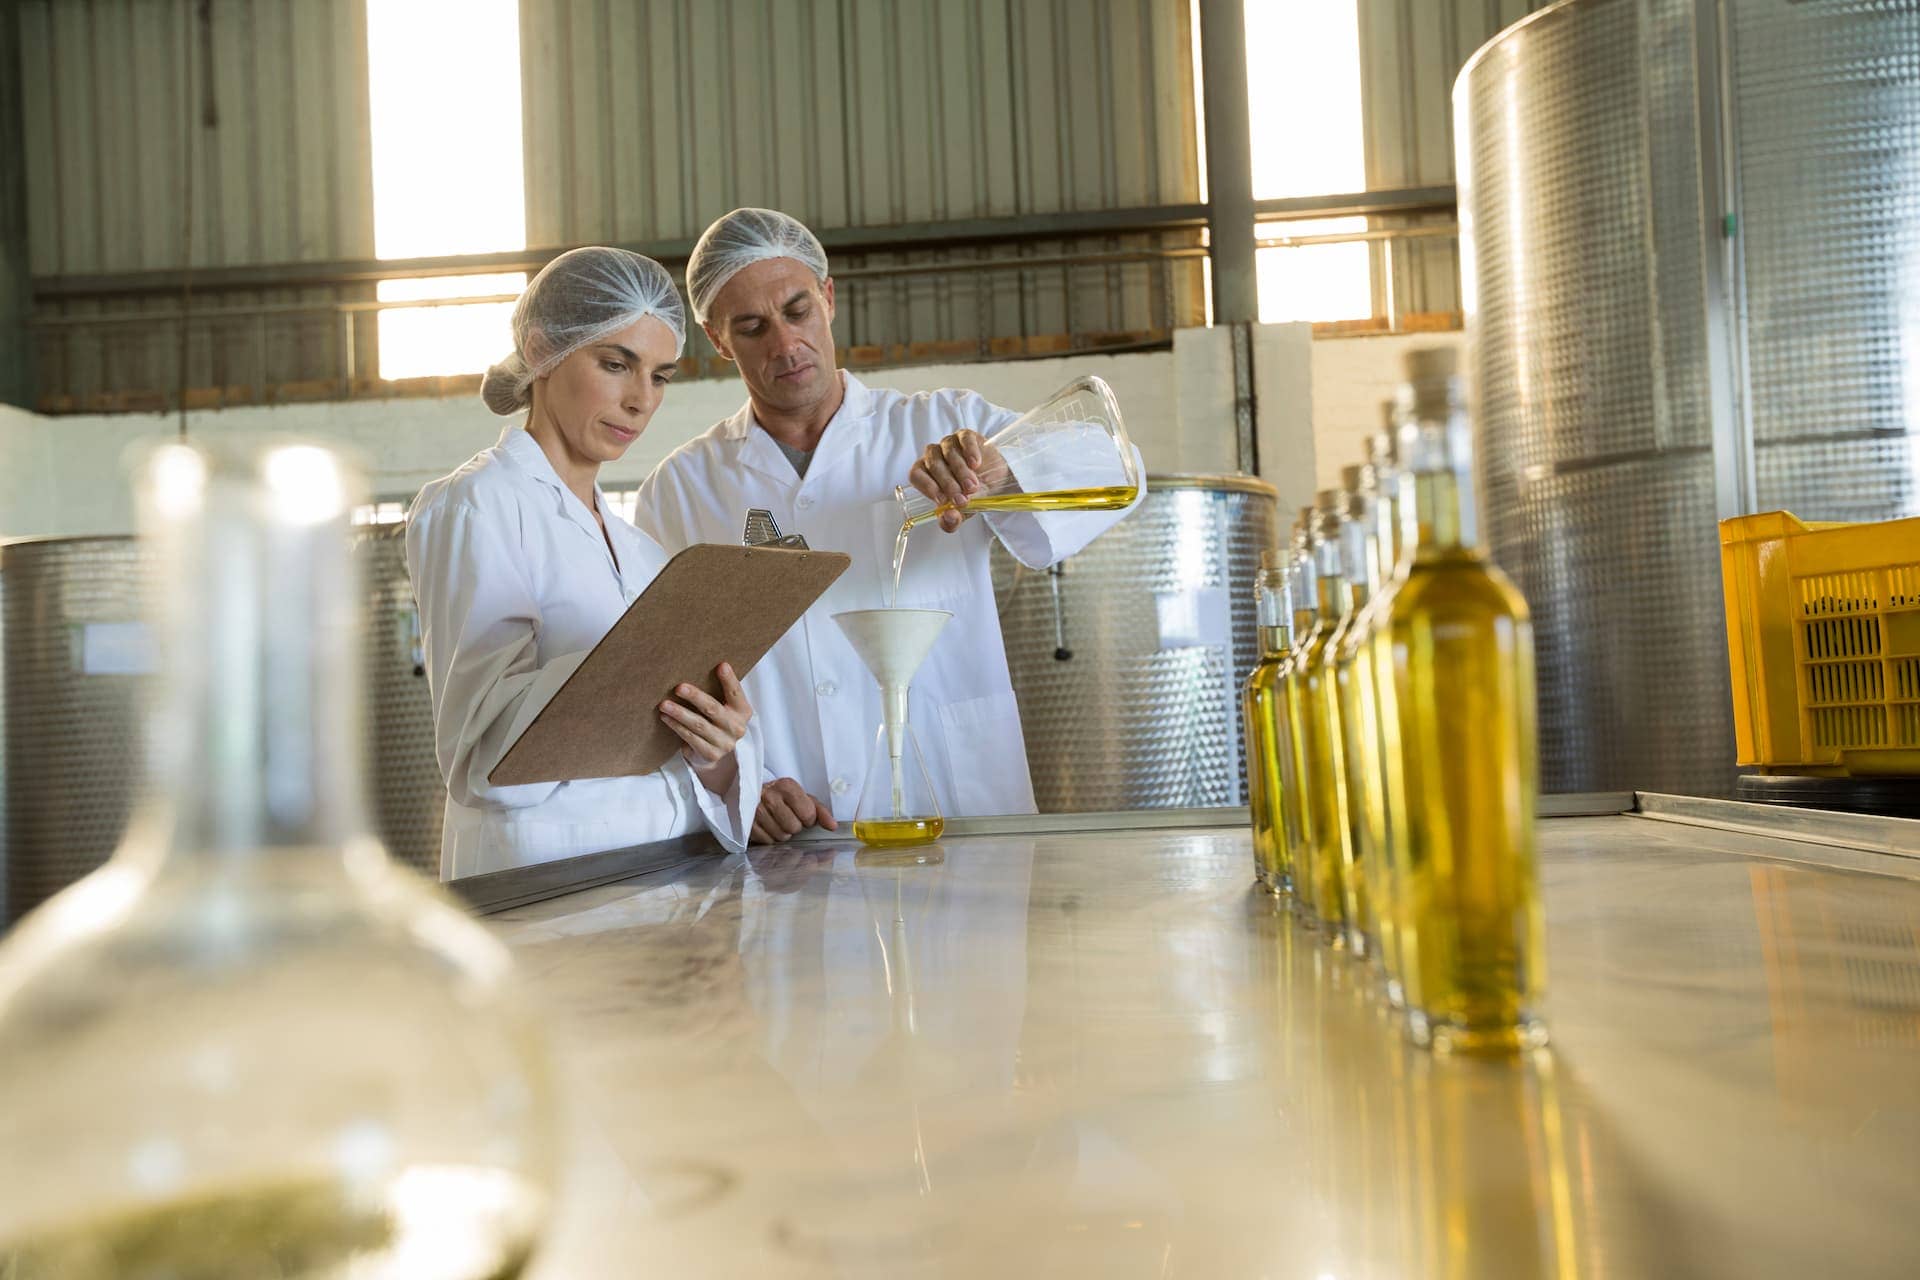 sponsored-bruker-launches-nmr-olive-oilprofiling-solution-for-quality-control-and-authenticity-verification-olive-oil-times